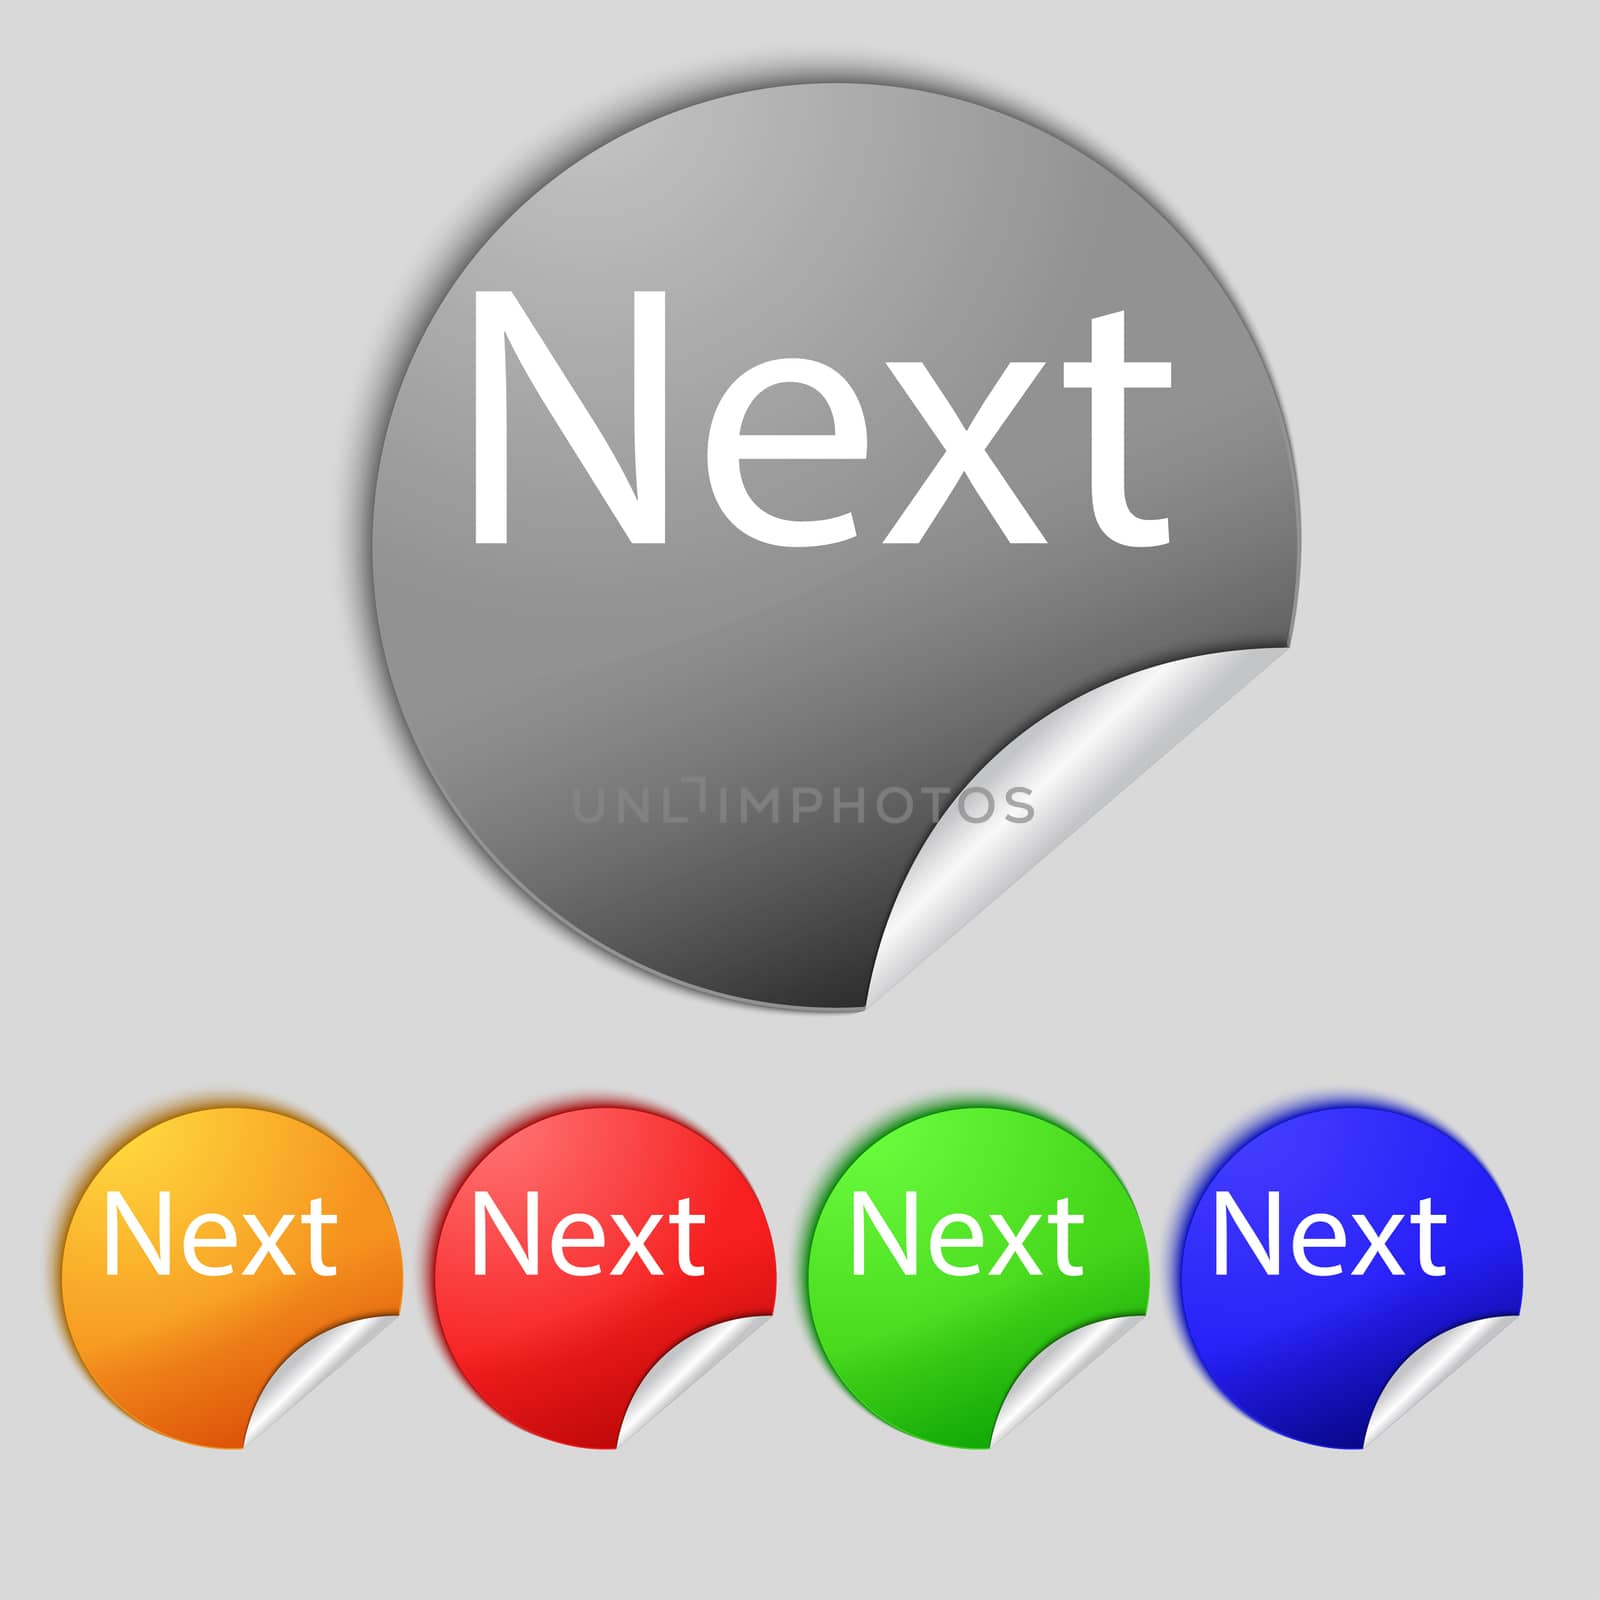 Next sign icon. Navigation symbol. Set of colored buttons. illustration